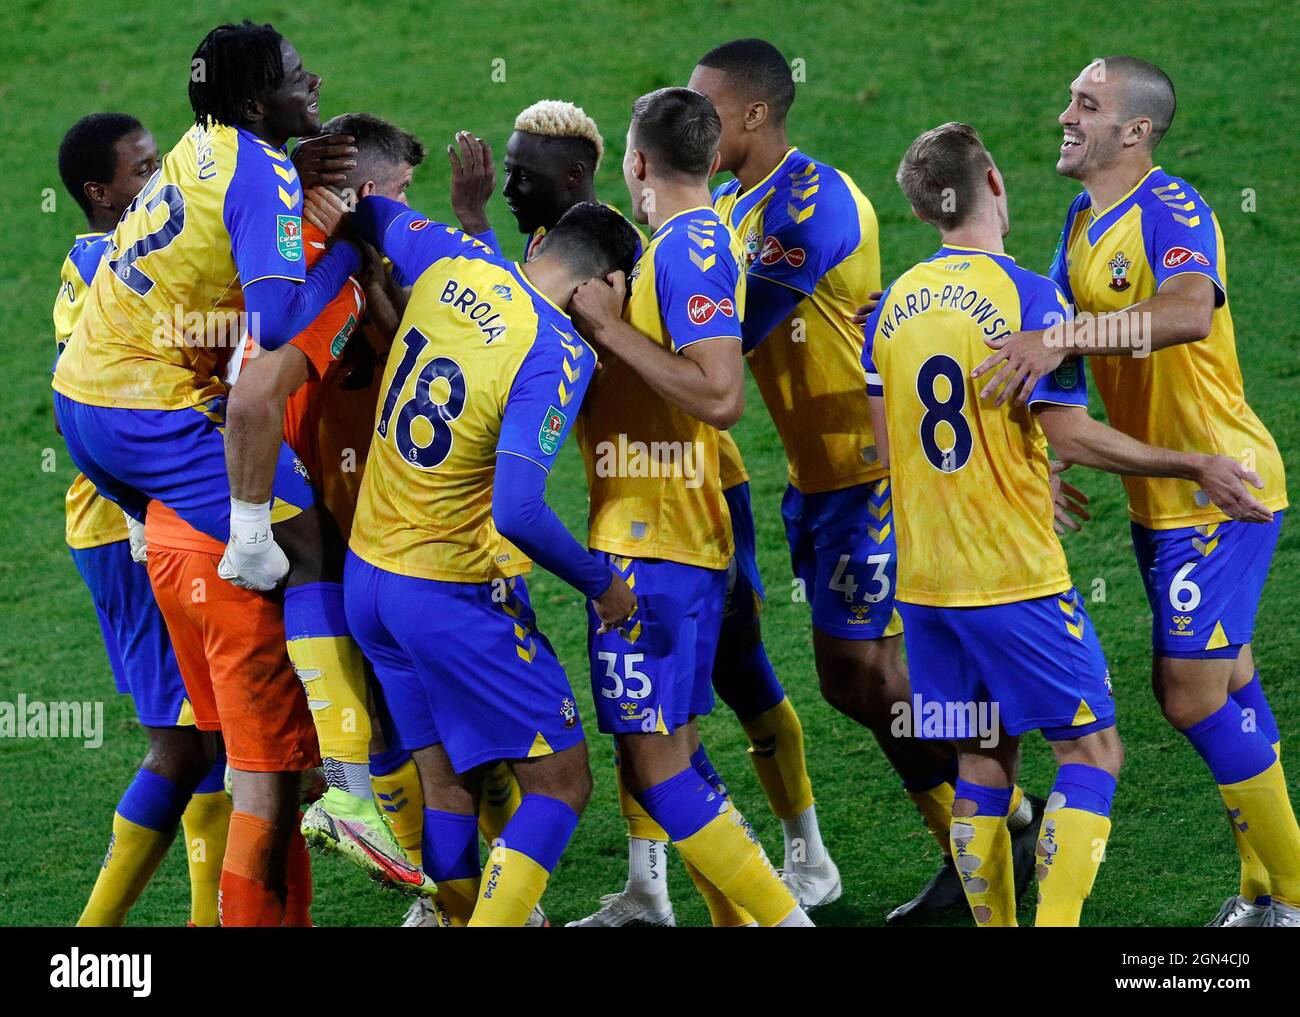 Sheffield, England, 21st September 2021.  Southampton players celebrate with goalkeeper Fraser Forster after winning a penalty shoot out to decide the Carabao Cup match at Bramall Lane, Sheffield. Picture credit should read: Darren Staples / Sportimage Credit: Sportimage/Alamy Live News Stock Photo